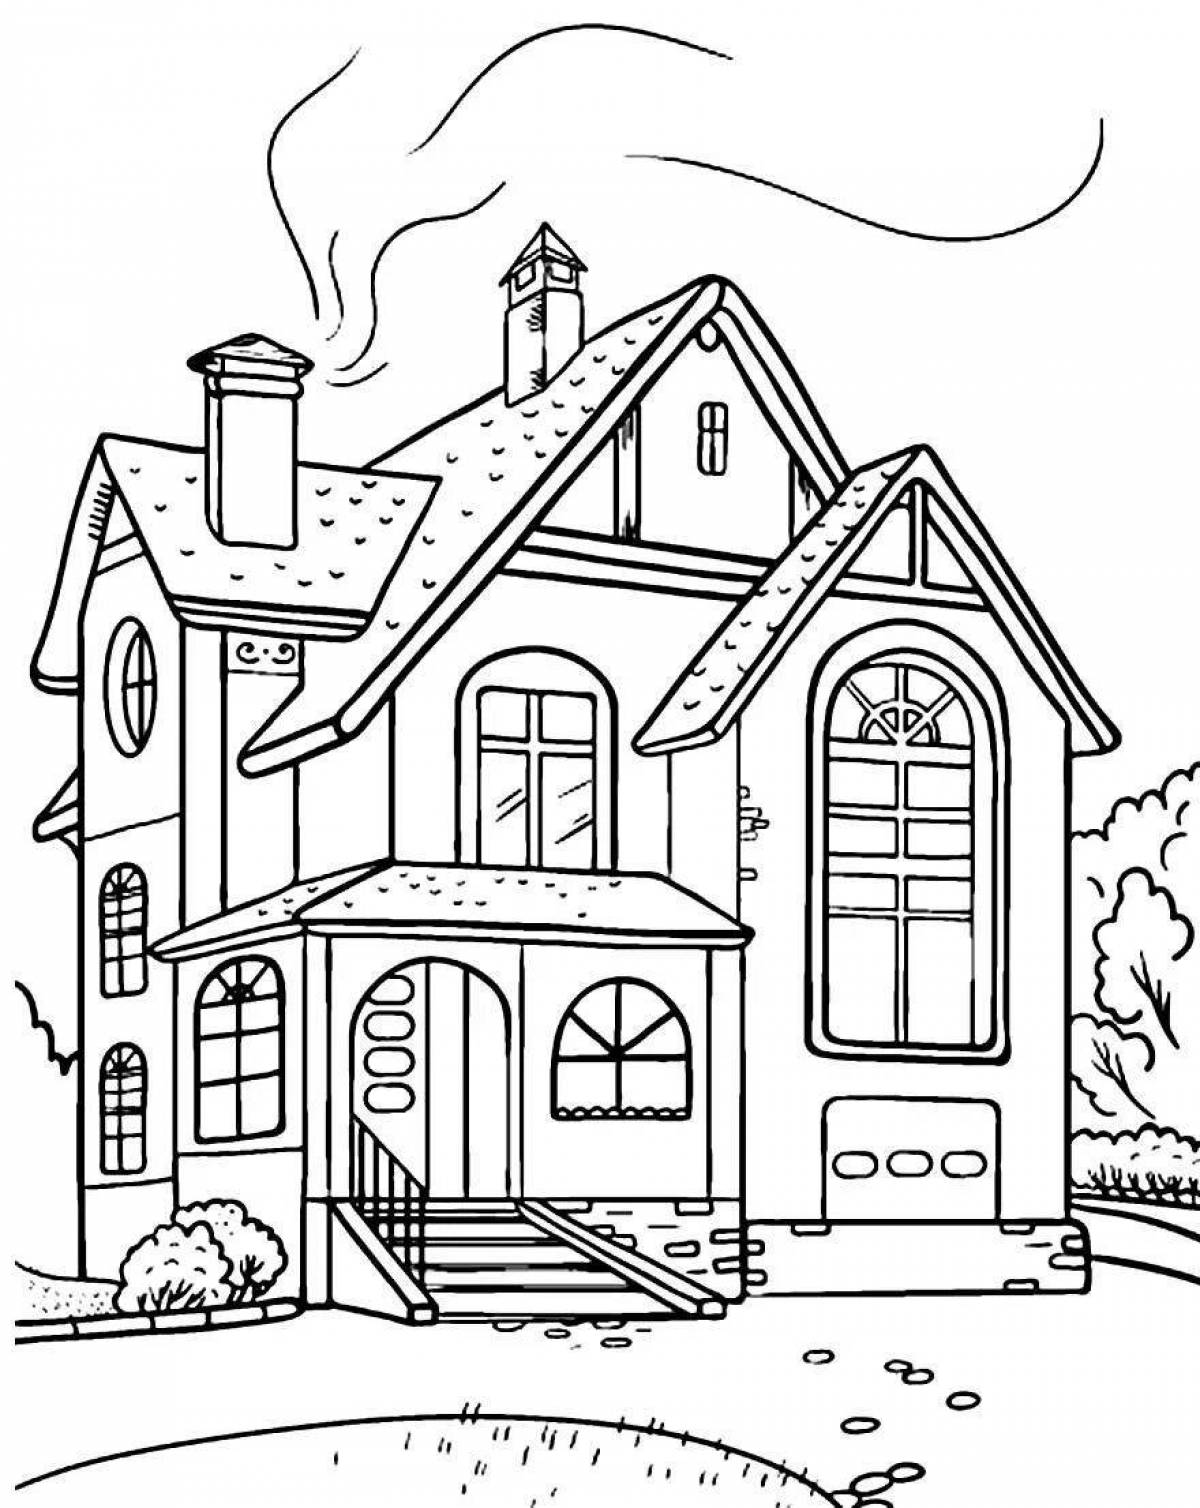 Gorgeous two-storey house coloring book for children